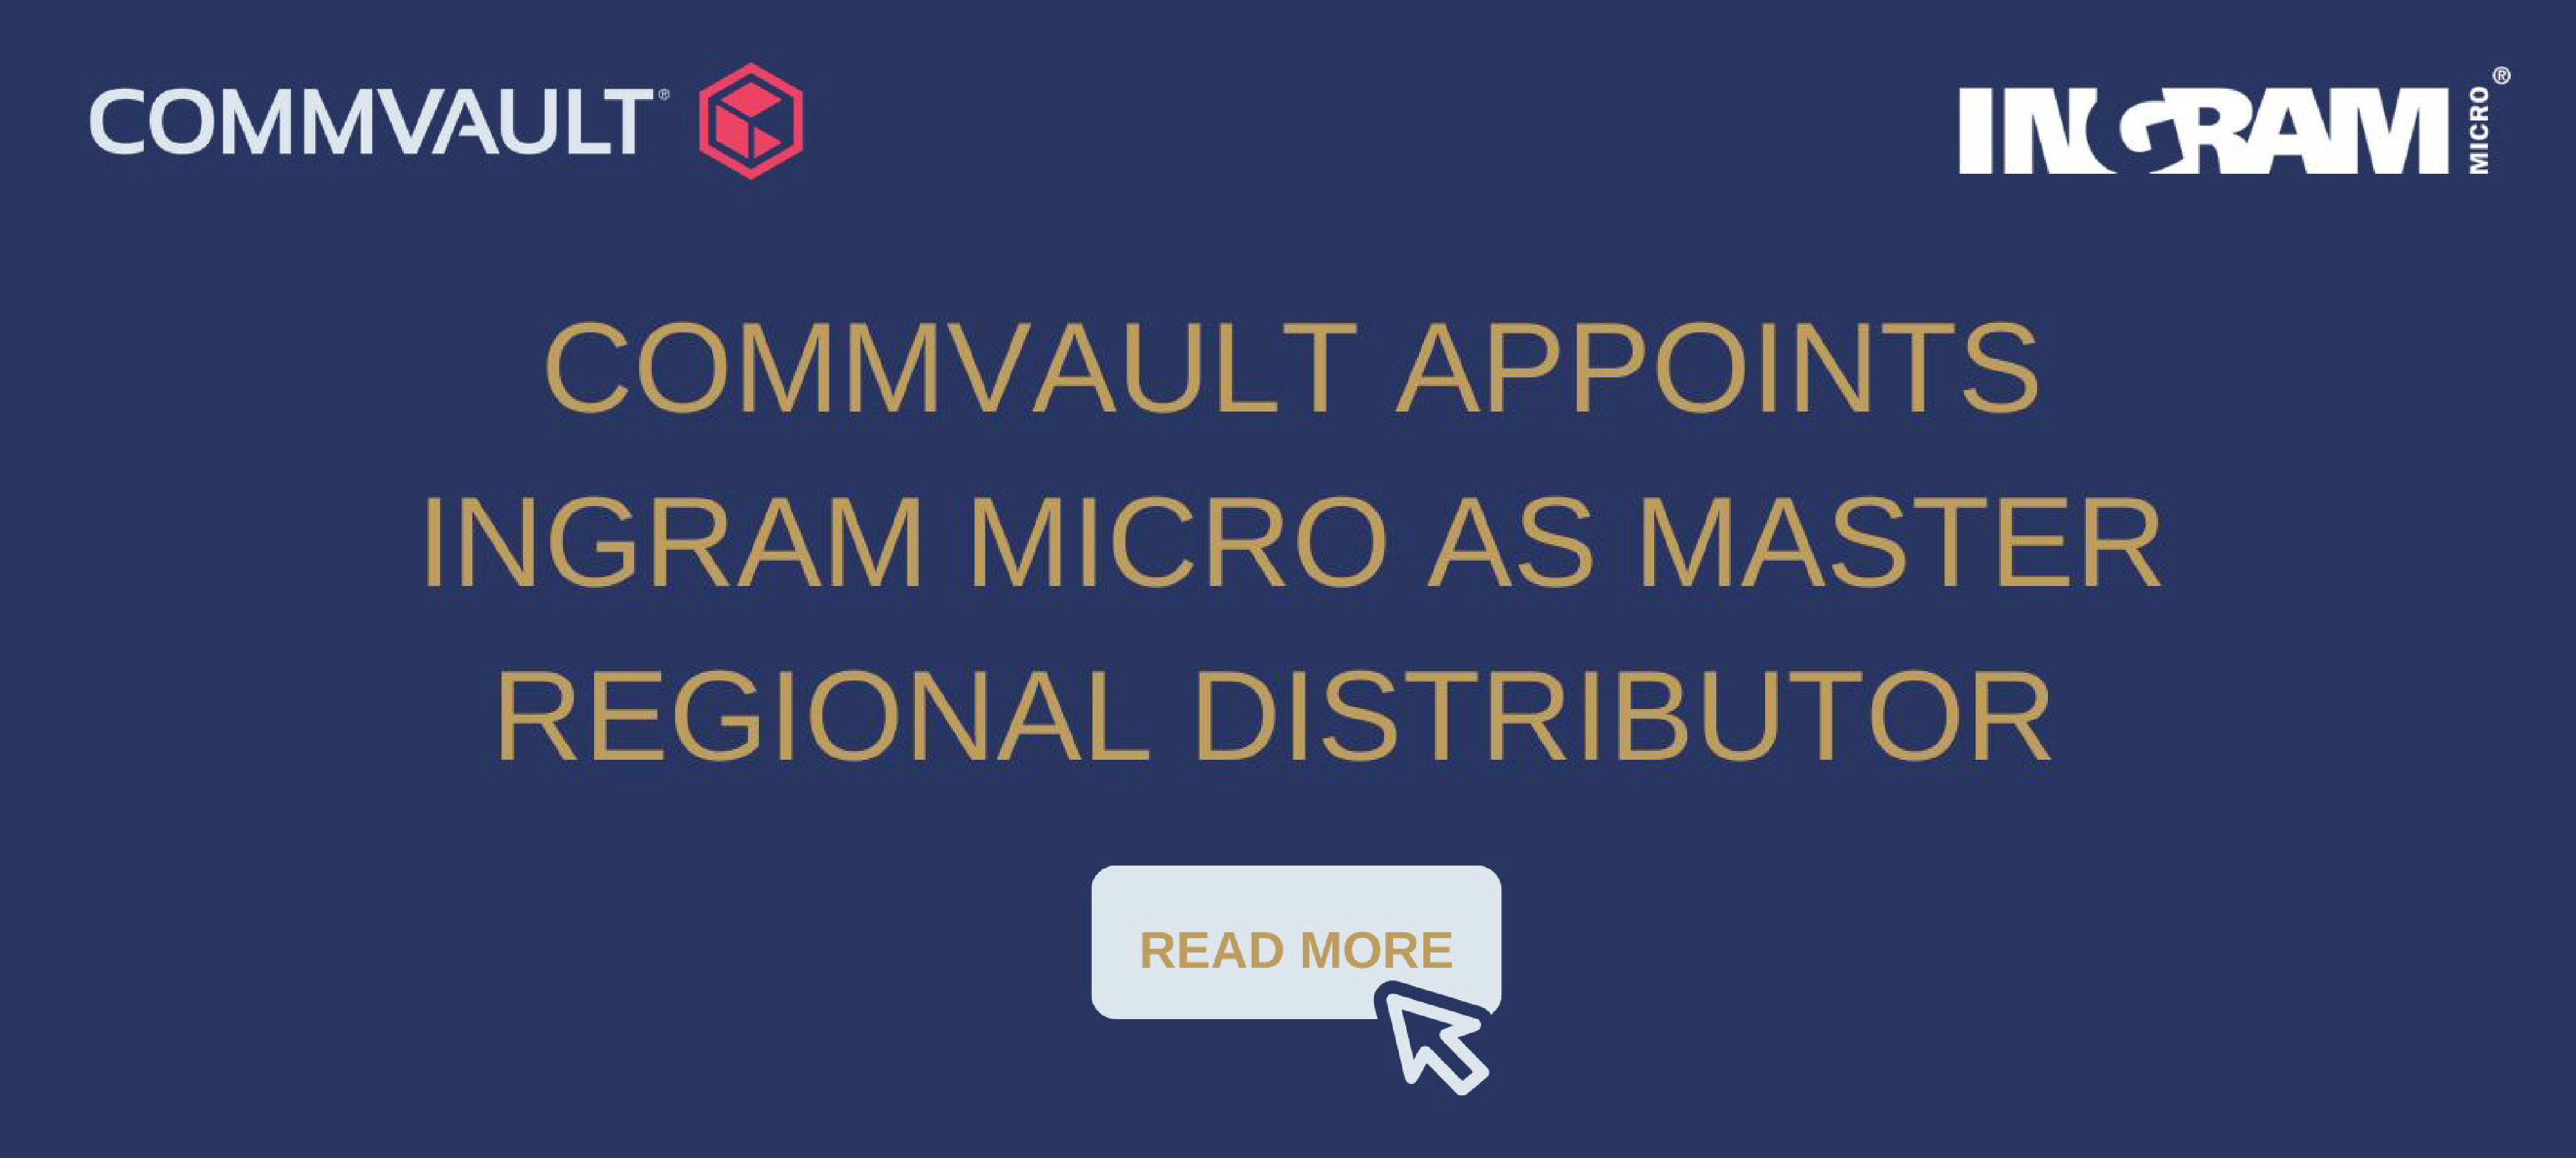 Commvault appoints Ingram Micro as master regional distributor with Singapore and Malaysia the first